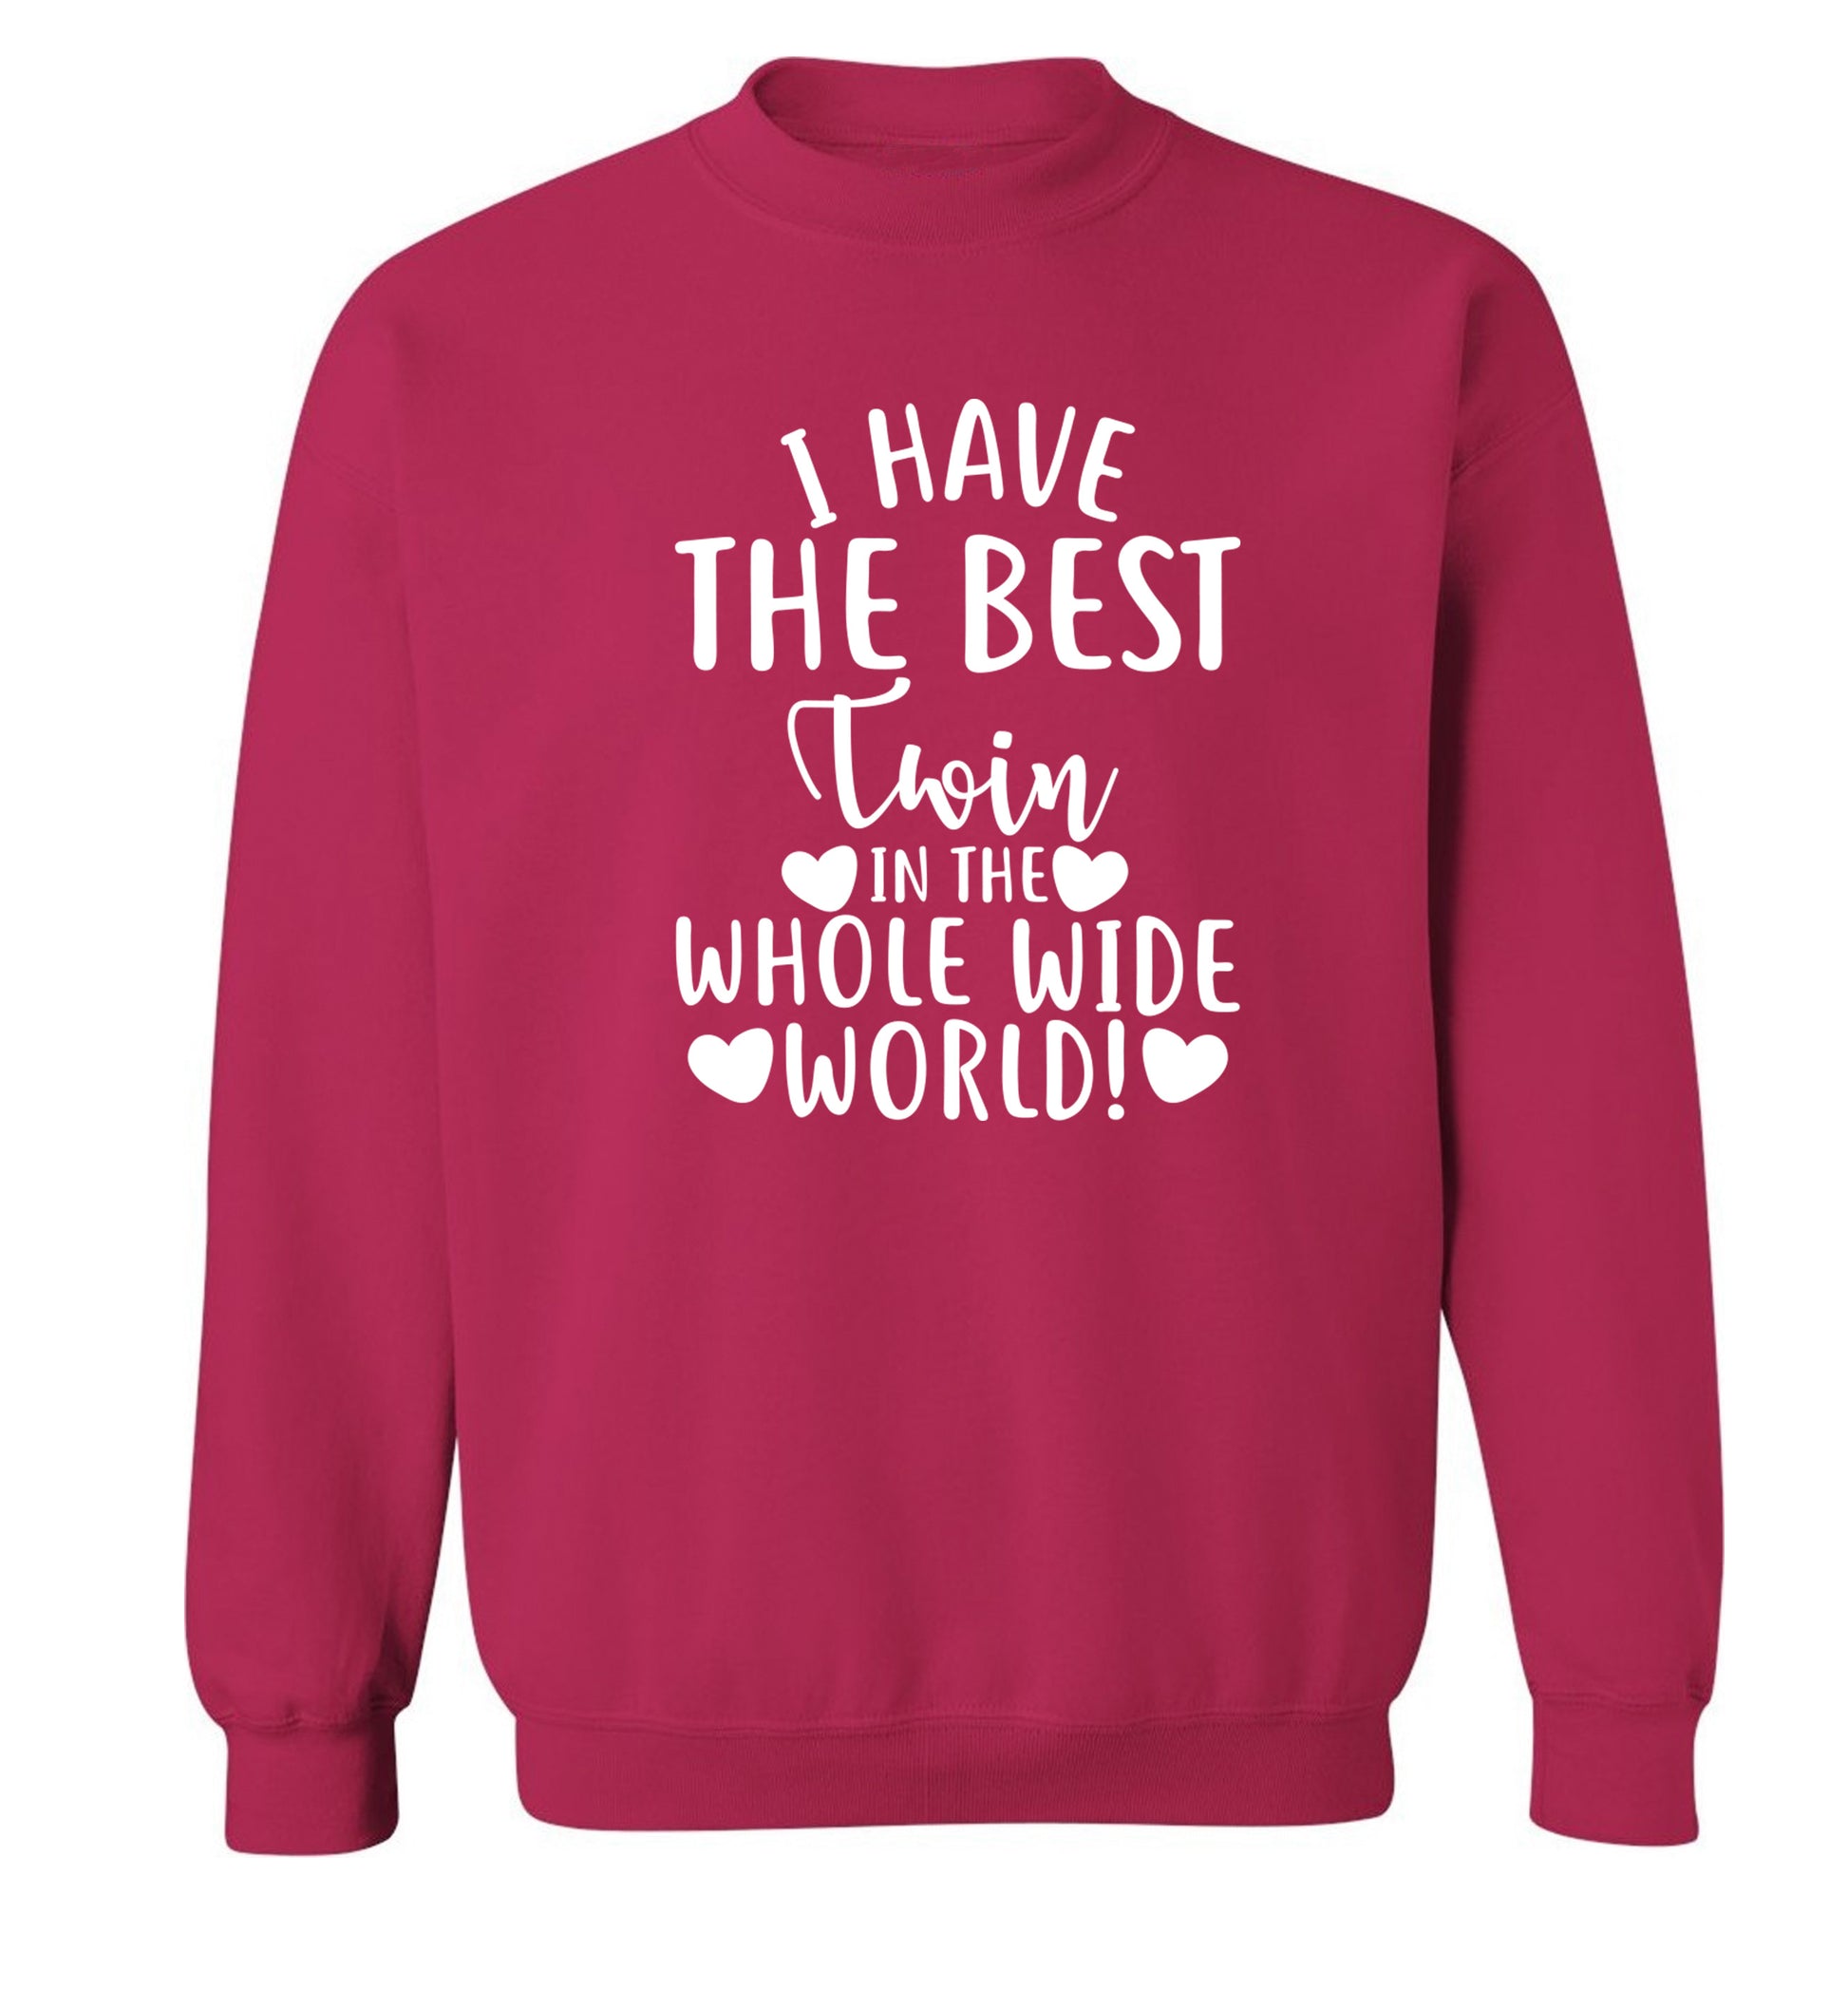 I have the best twin in the whole wide world! Adult's unisex pink Sweater 2XL